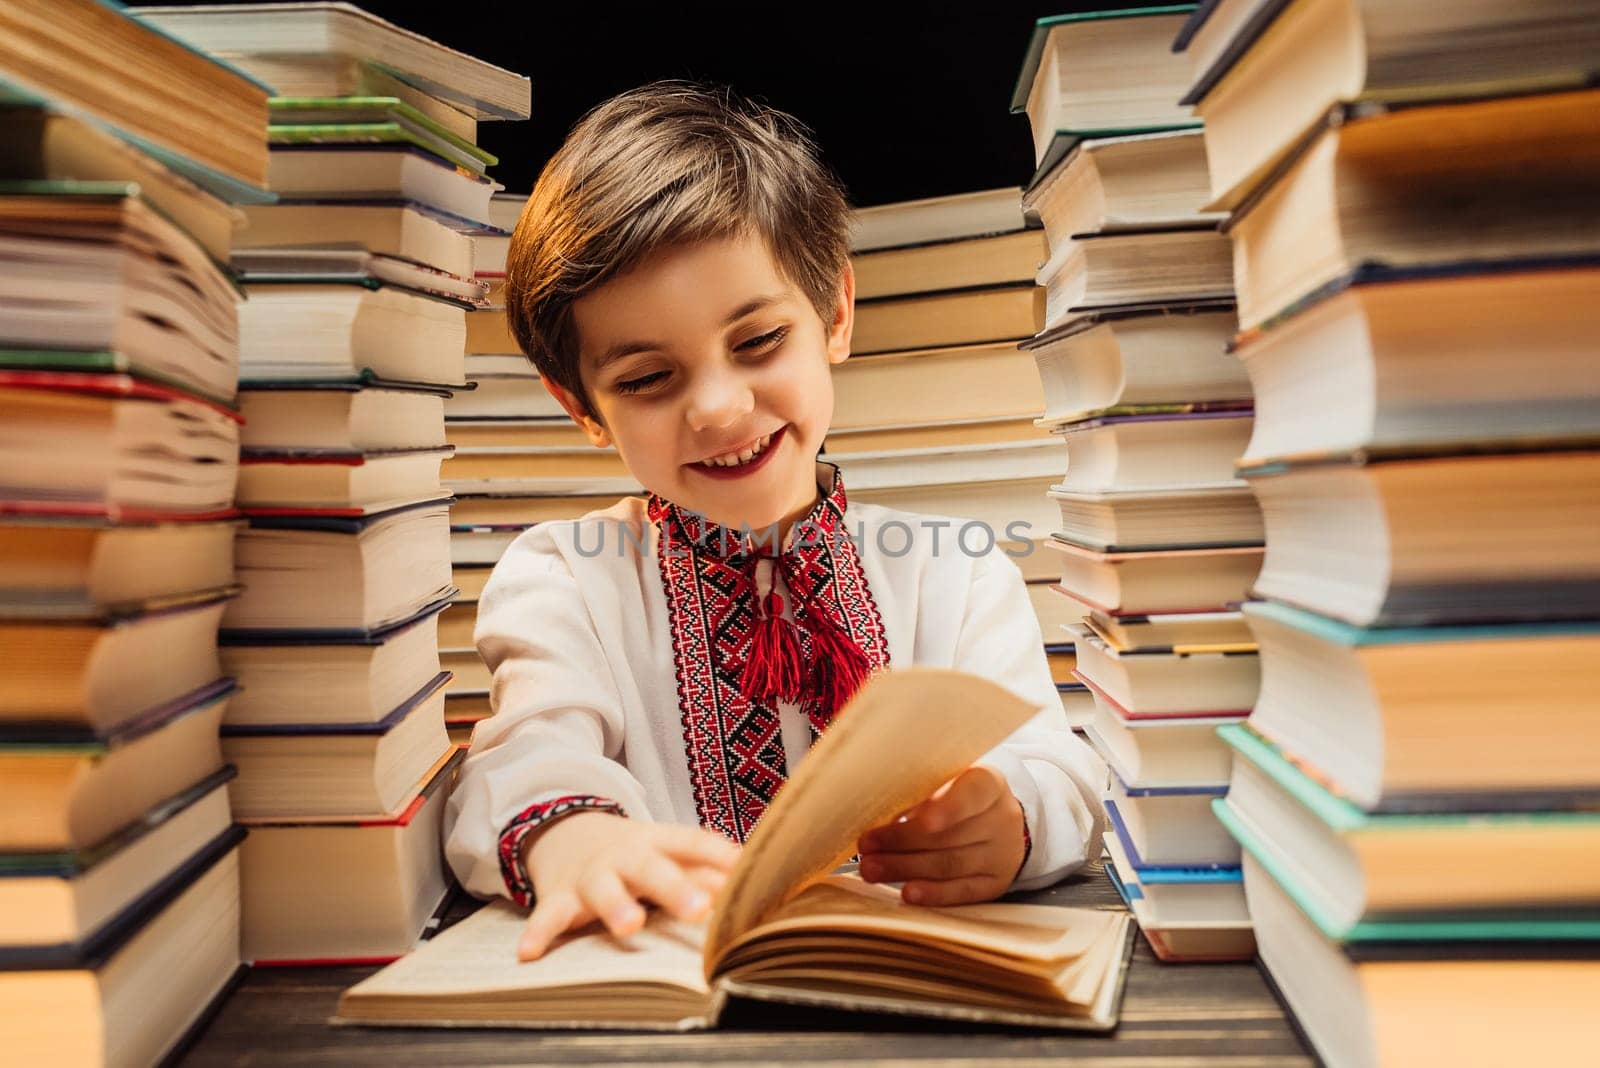 Handsome little ukrainian child flips through book pages in library. Elementary school boy enjoying reading in bookshop or bookstore. High quality 4k footage